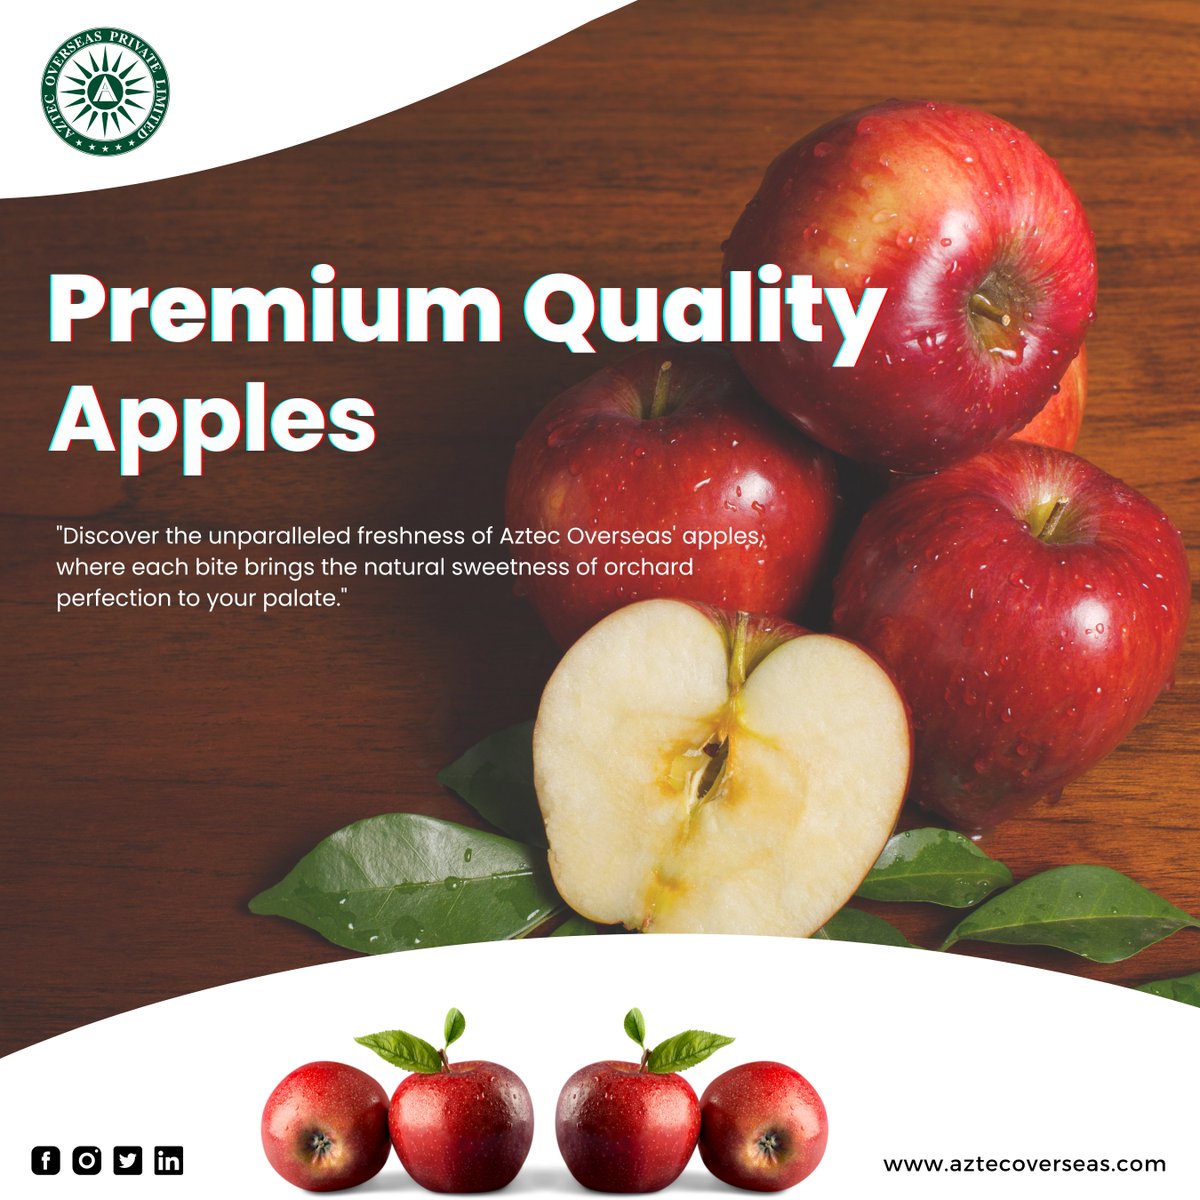 Discover the unparalleled freshness of Aztec Overseas apples, where each bite brings the natural sweetness of orchard perfection to your palate.
.
.
#AztecOverseas #Premiumapple #GoldenGoodness #NaturesPerfection #HealthyIndulgence #apple